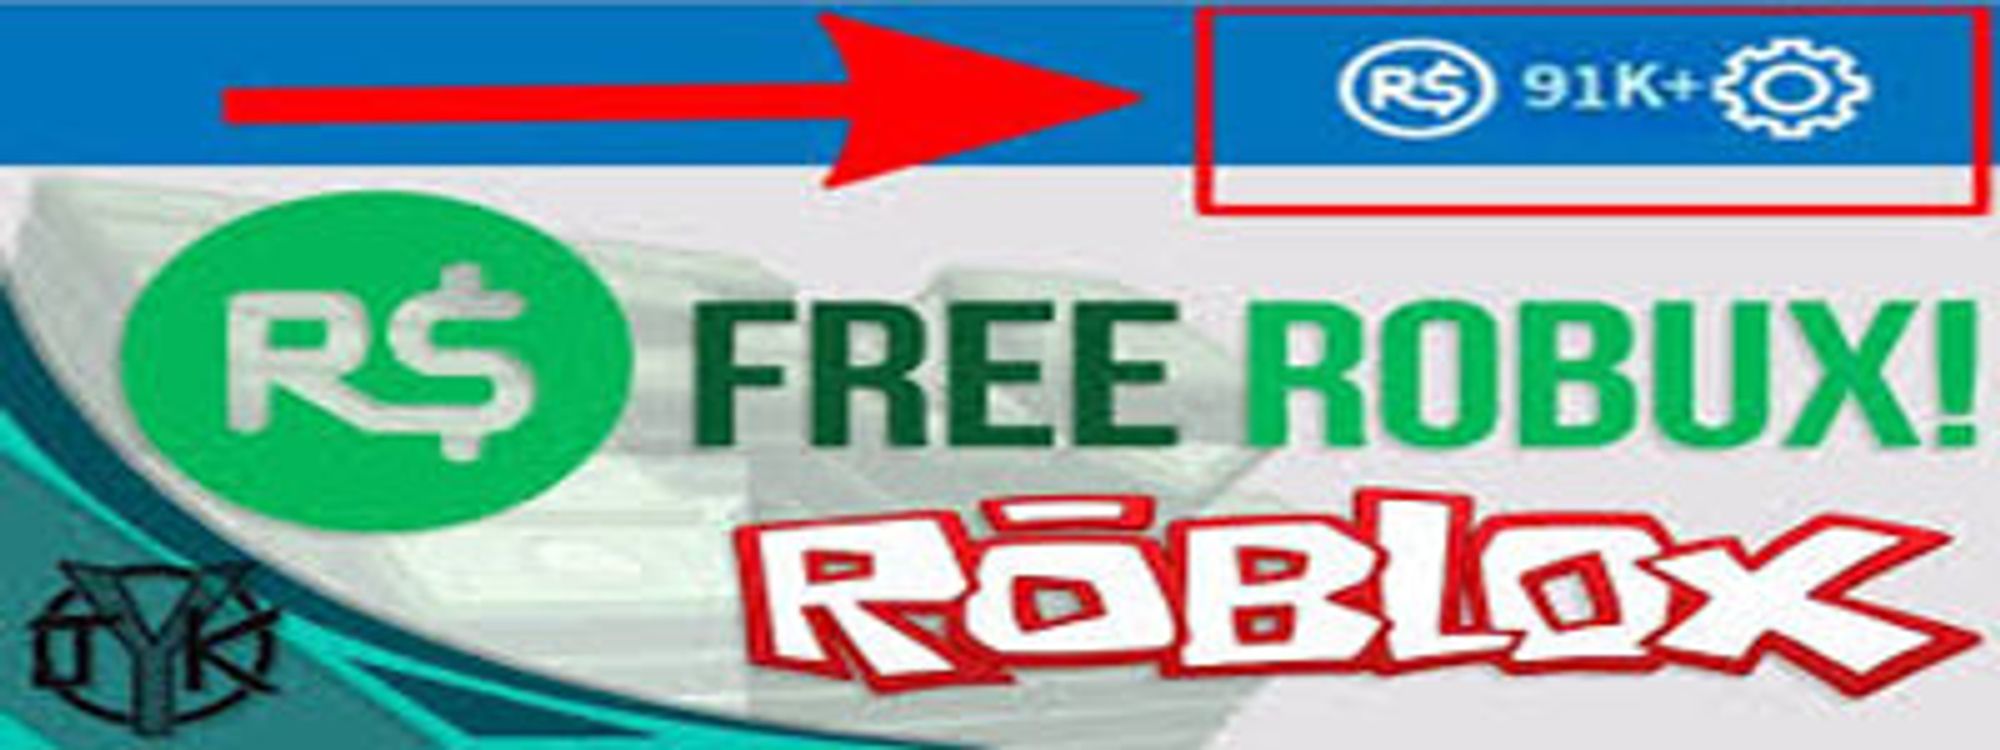 Roblox Robux Free Roblox Robux Codes With Skins Password Account 2020 - easy robux today robloxaccountppua